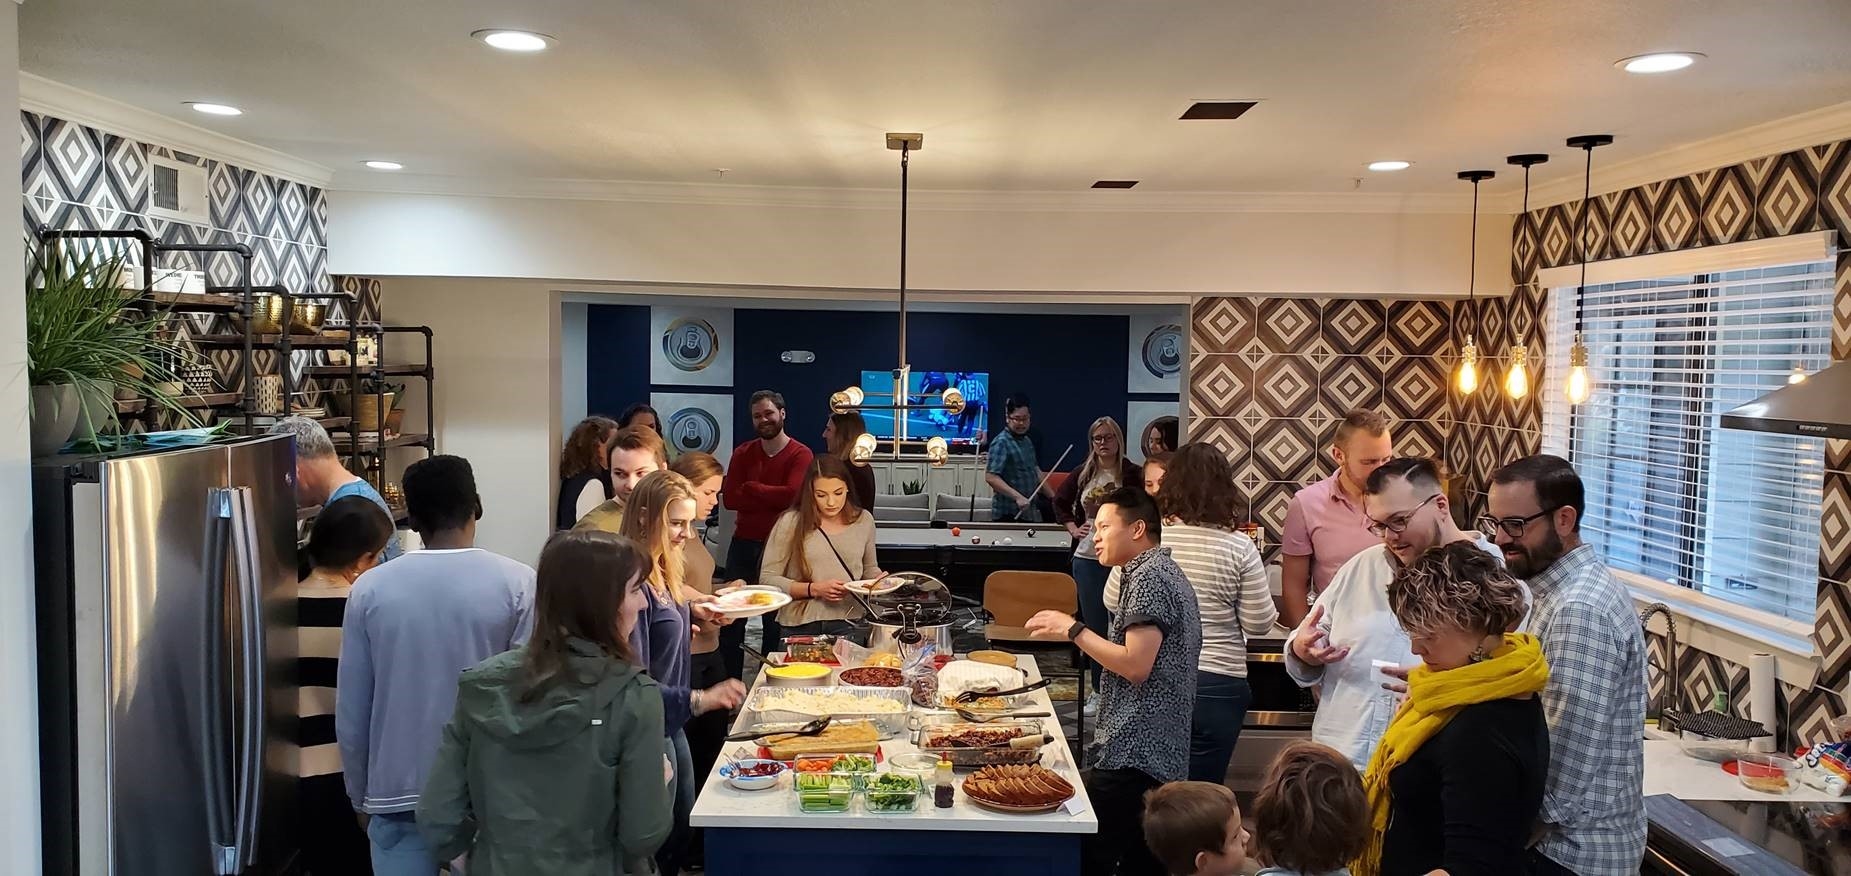 Thanksgiving (or Finsgiving as we call it around here!) potlucks across the Pariveda offices brought Fins together for good food and time to come together with gratitude for one another!